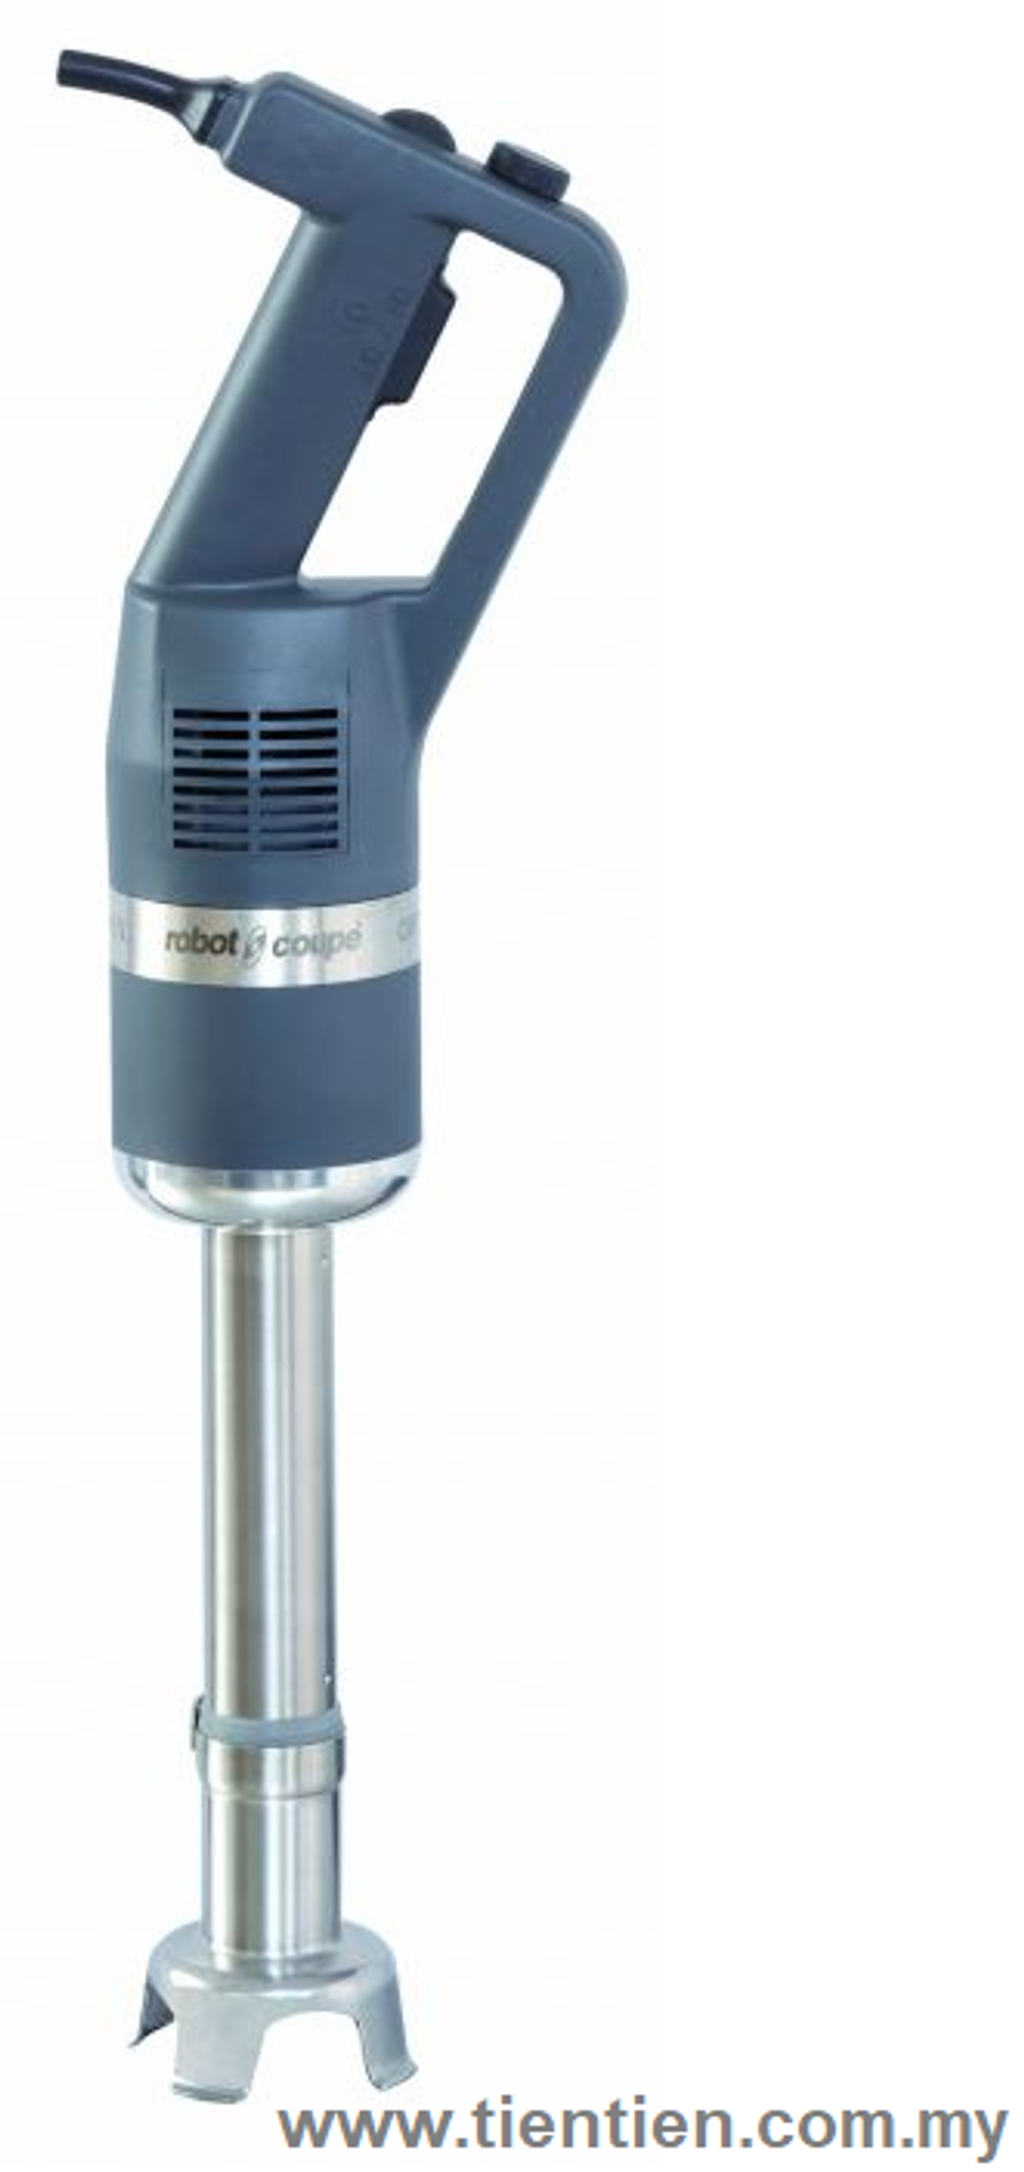 robot-coupe-compact-range-250mm-stick-blender-variable-speed-pan-capacity-cmp250vv-tientien-malaysia.png